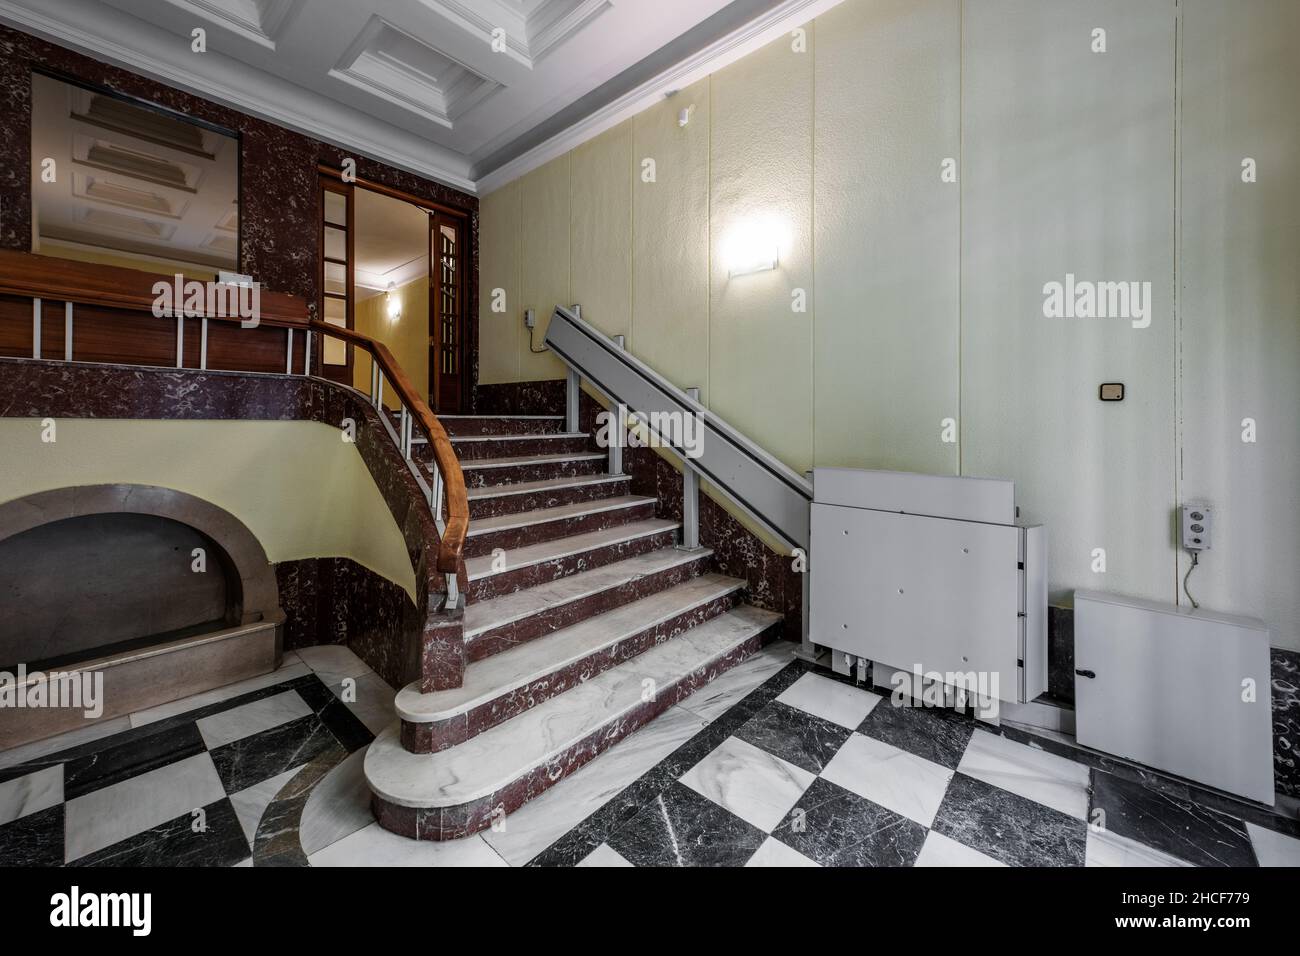 Marble stairs going up to residential homes and stair lifts for wheelchairs Stock Photo